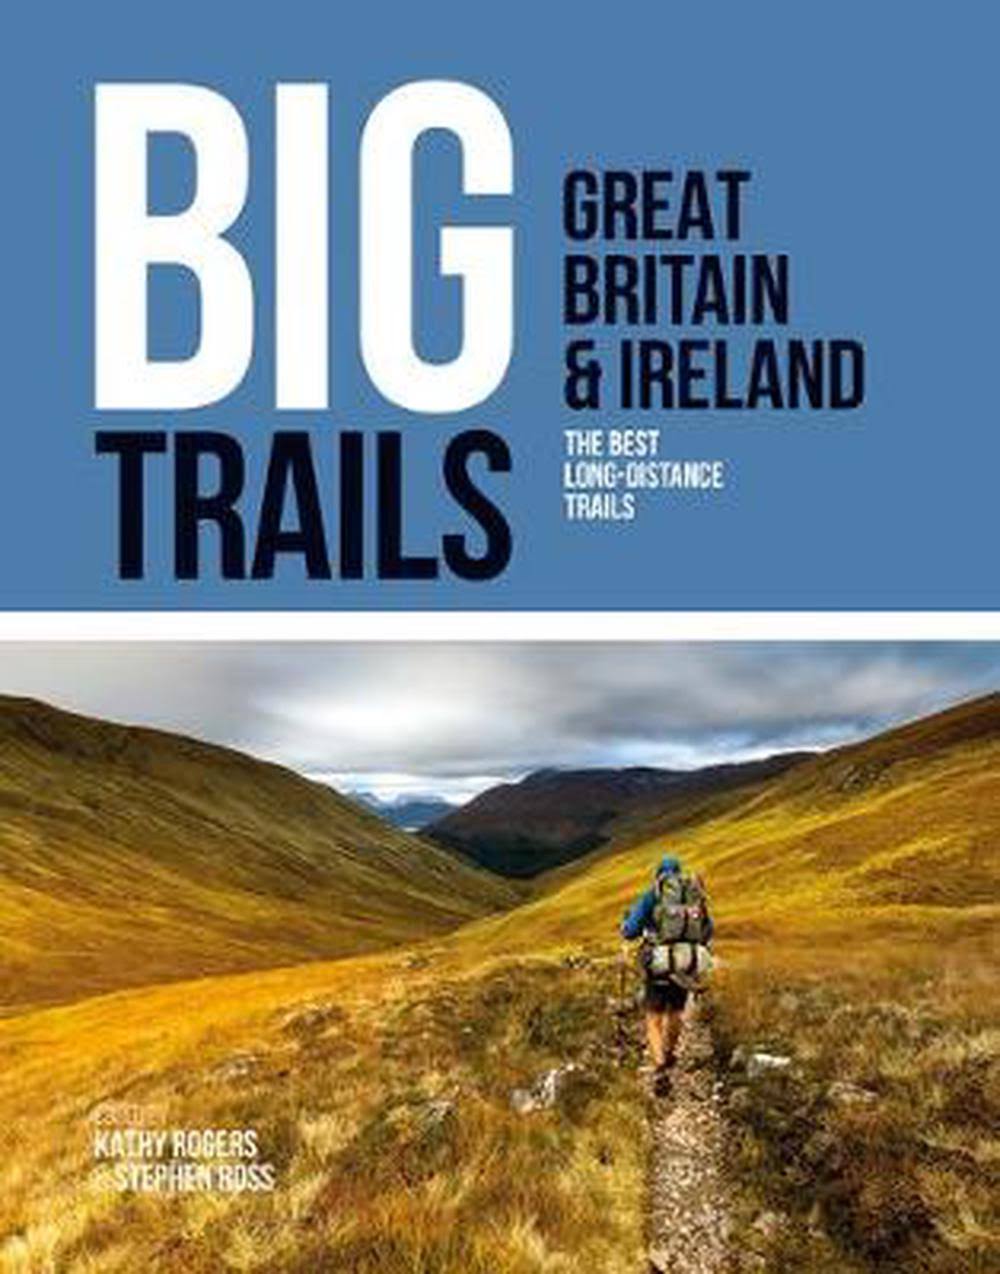 Big Trails: Great Britain & Ireland by Kathy Rogers